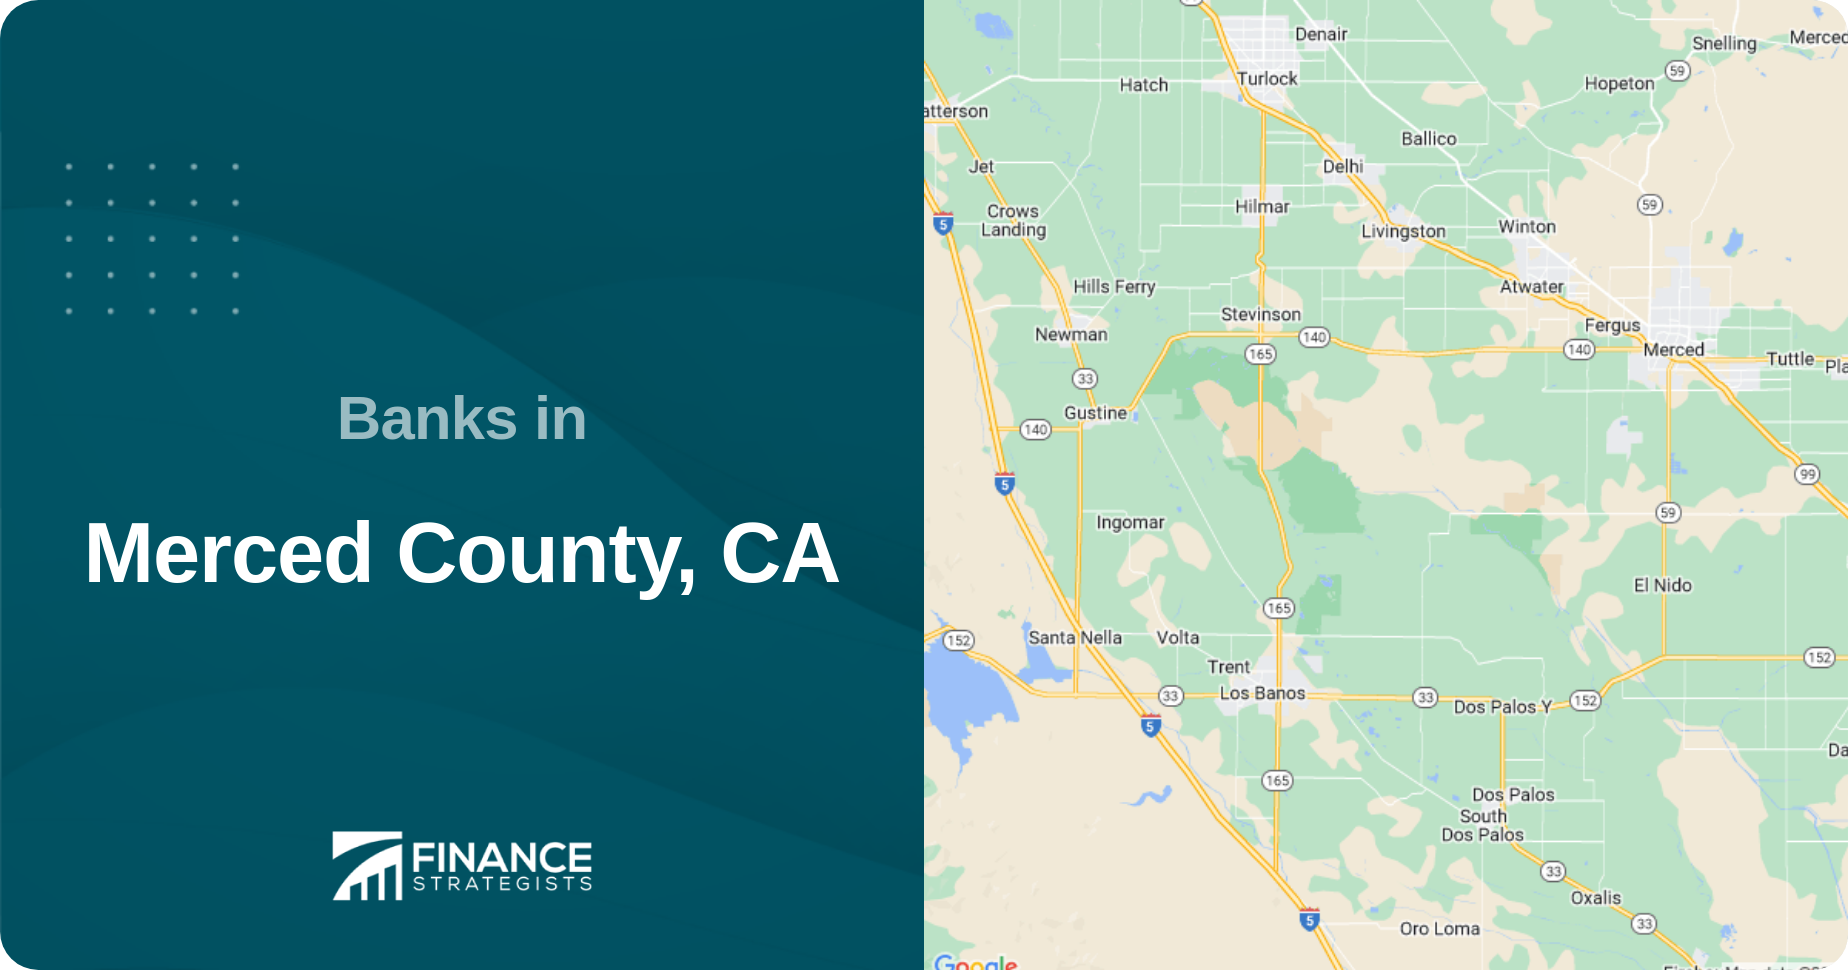 Banks in Merced County, CA